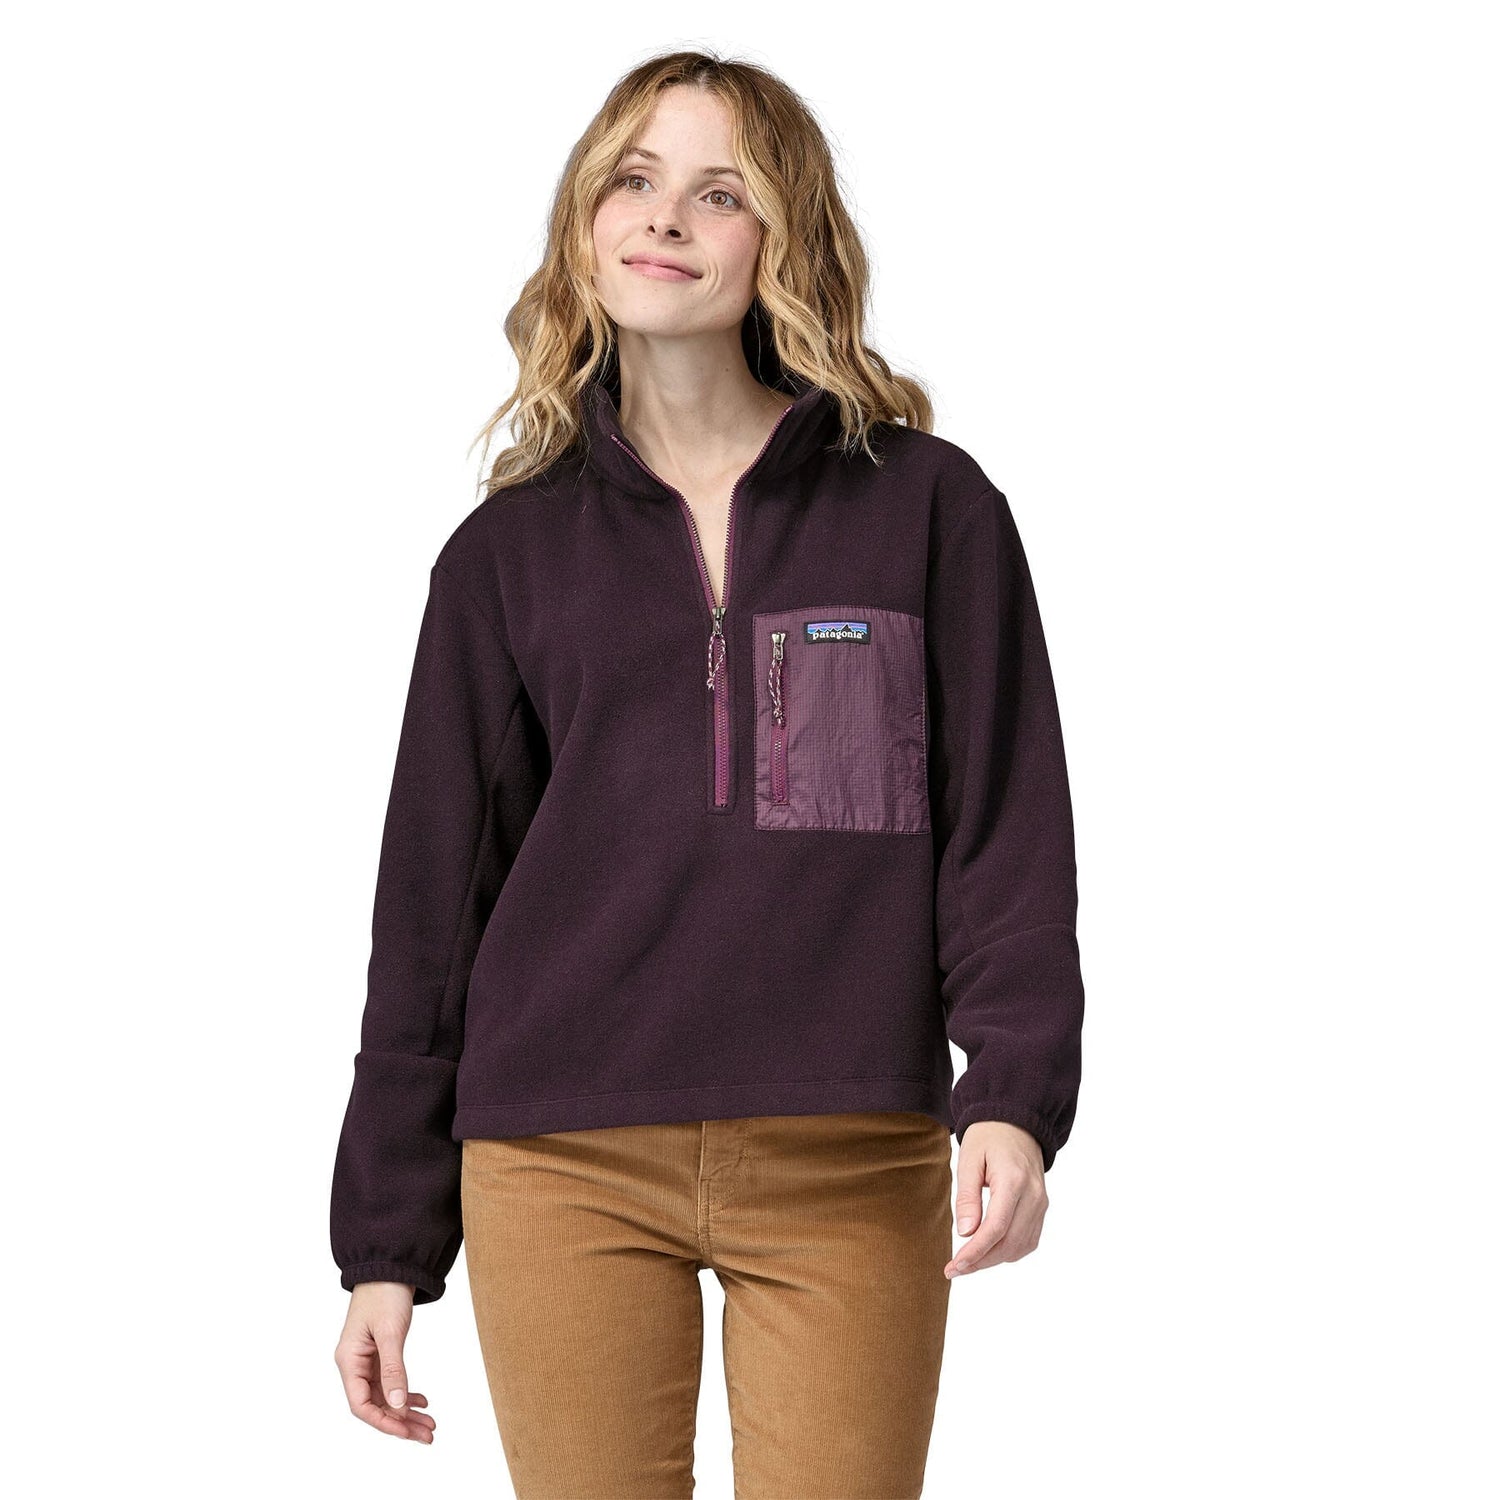 Patagonia - W's Microdini 1/2 Zip Fleece Pullover - 100% Recycled Polyester - Weekendbee - sustainable sportswear